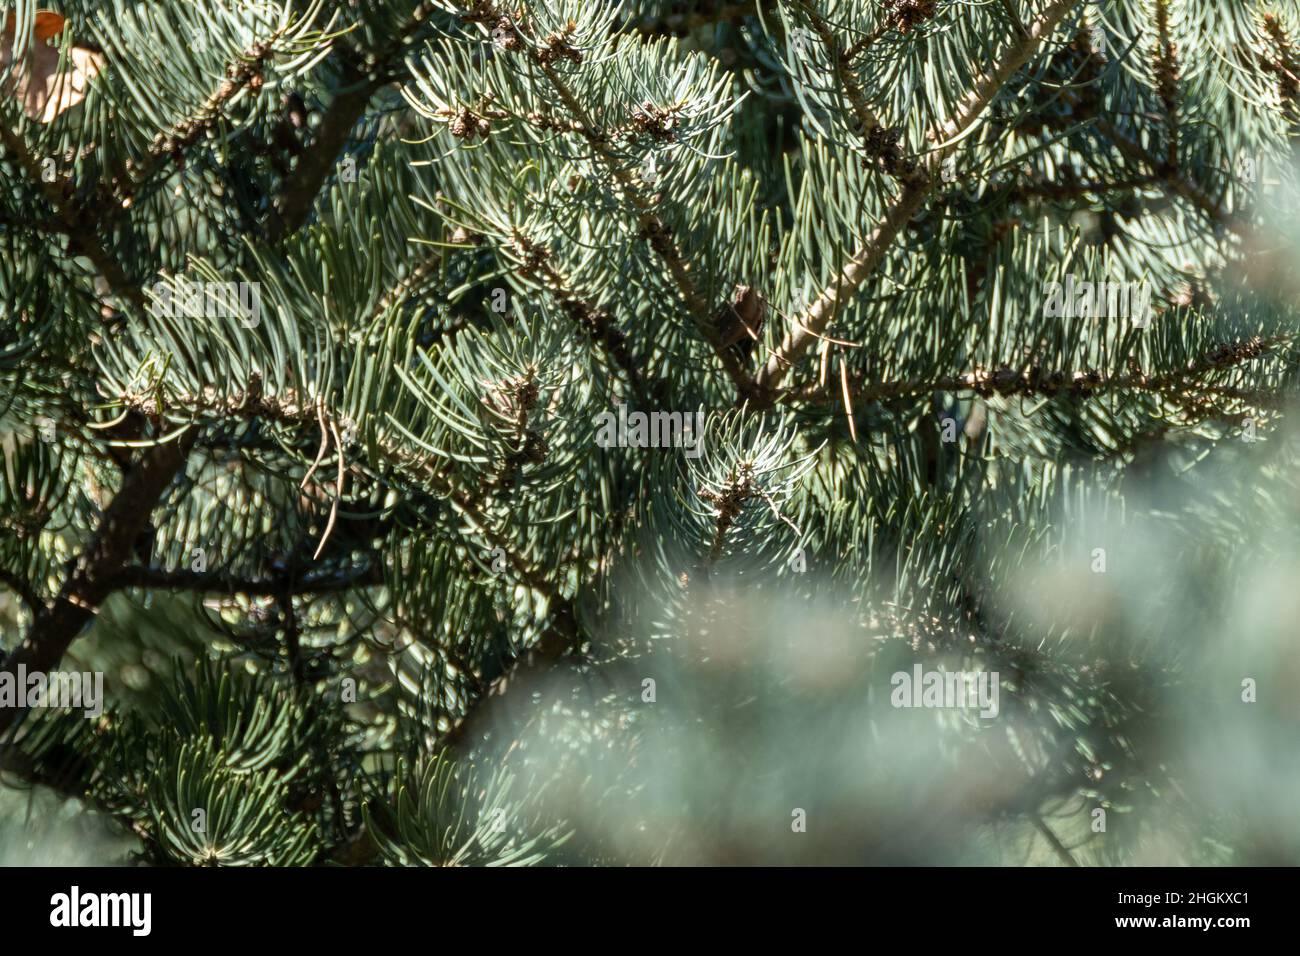 White Fir (Abies concolor) coniferous green pine tree needles close-up with sunny blurry foreground. Natural spring evergreen branches close view Stock Photo